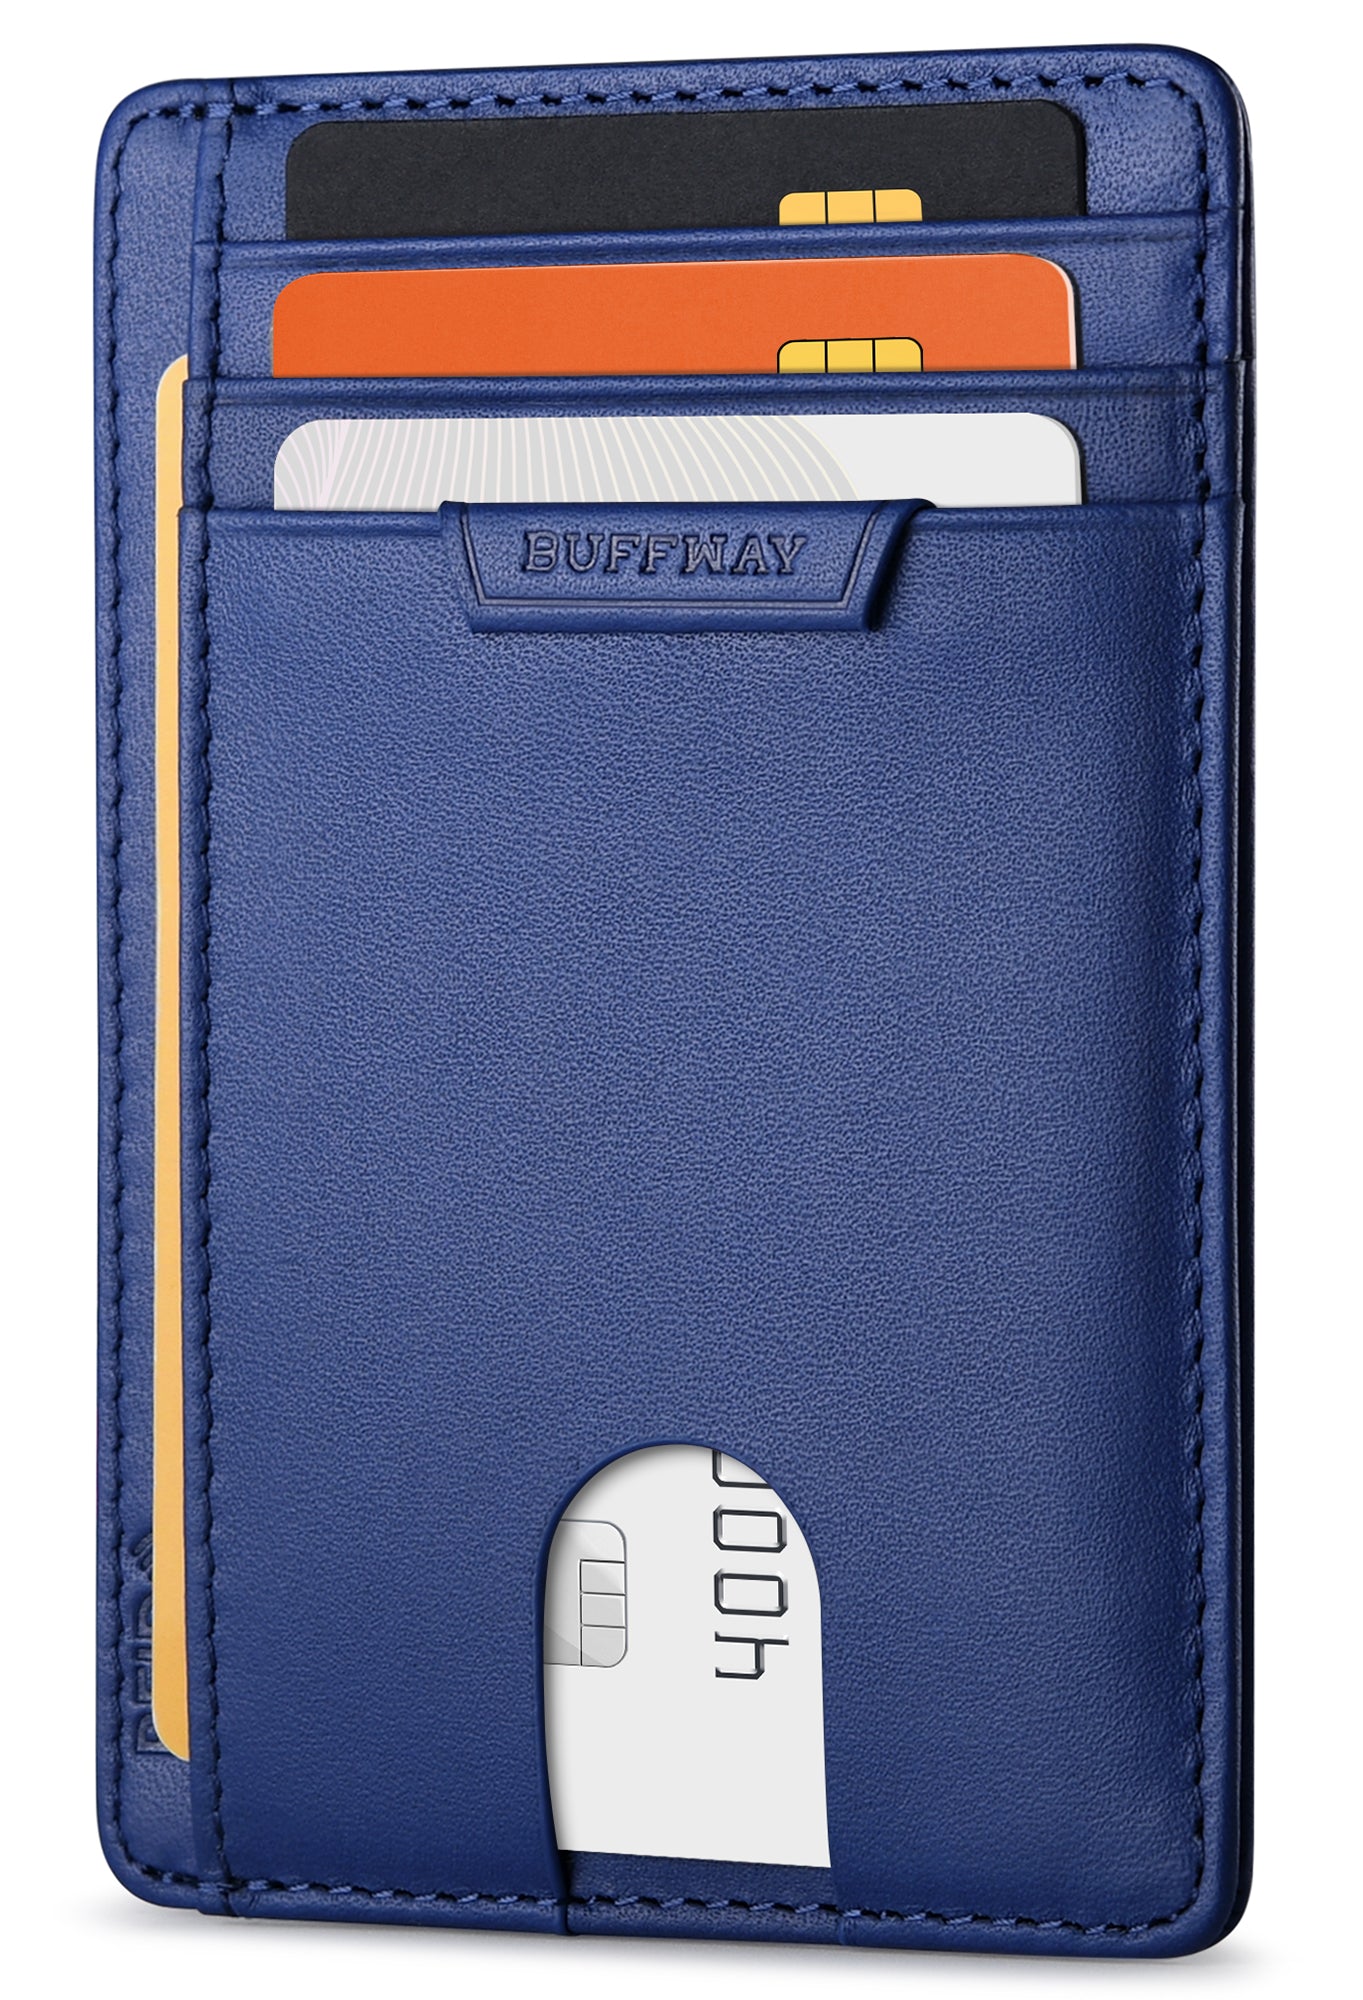 Buffway Slim Wallet for Men Women Minimalist Small Leather Front Pocket Wallets with RFID Blocking and Gifts Box - Bassa Blue